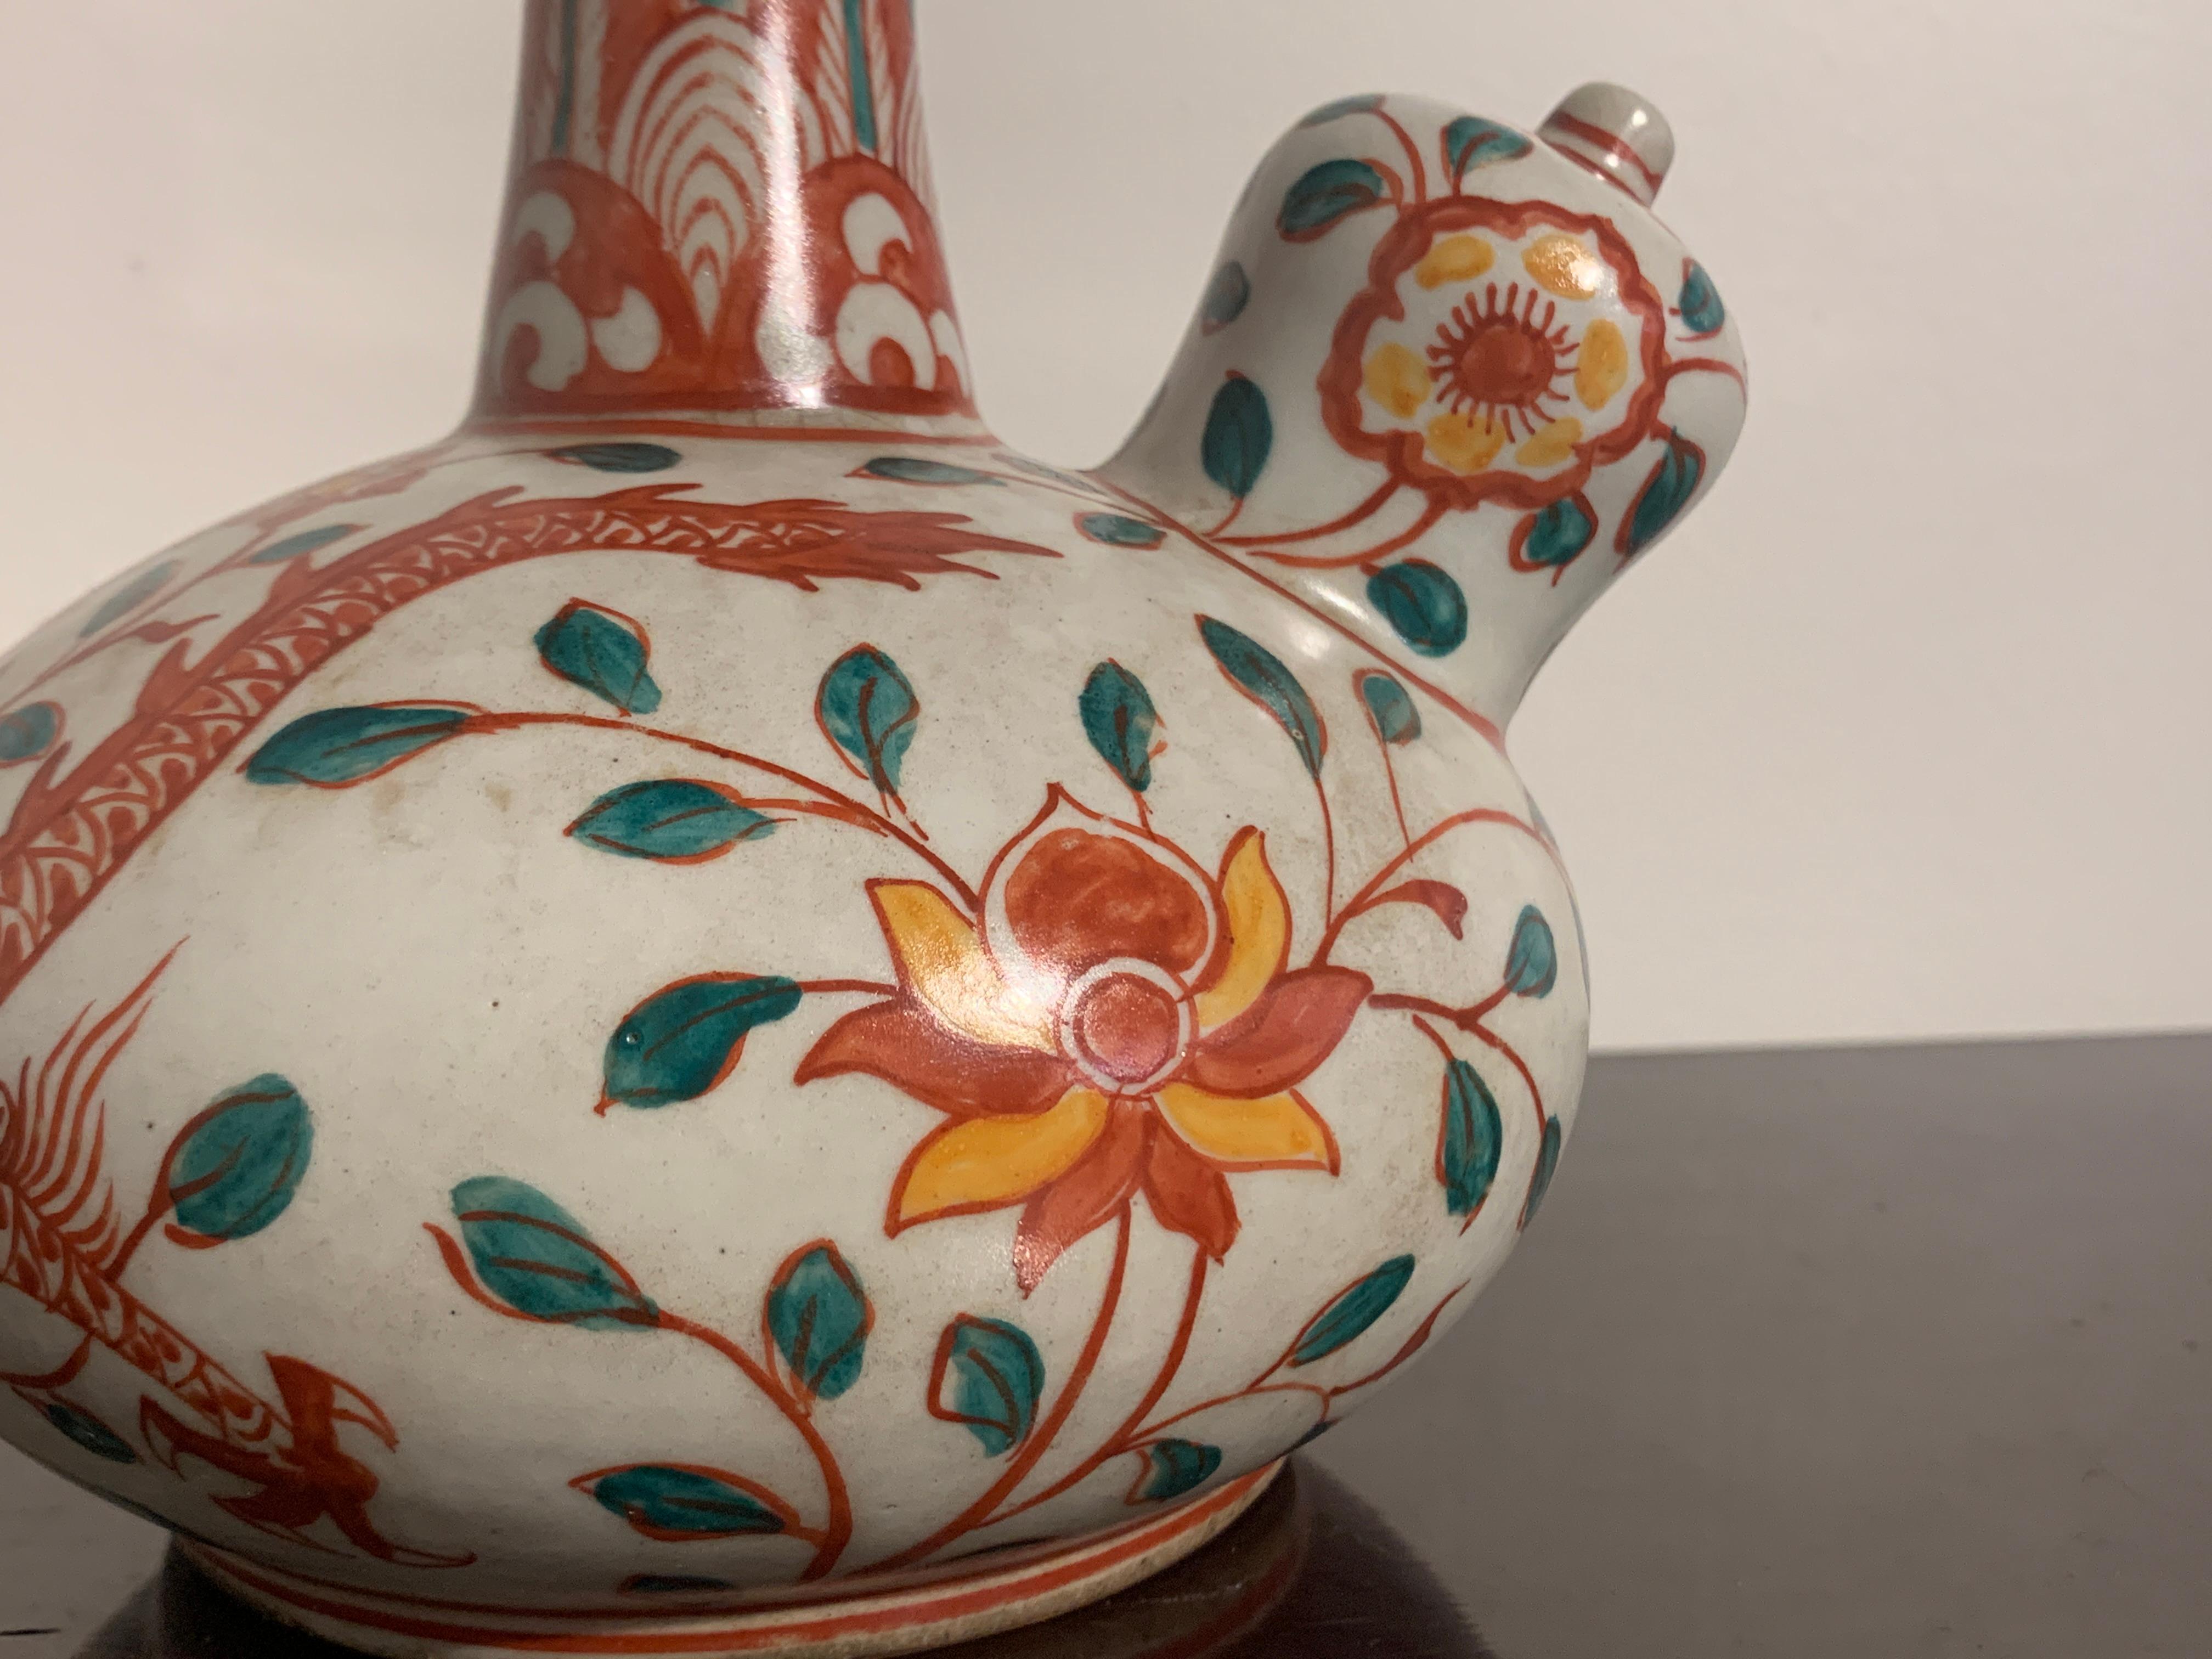 Early 20th Century Chinese Export Kendi, Swatow Ware, Porcelain with Polychrome Enamels, circa 1900 For Sale